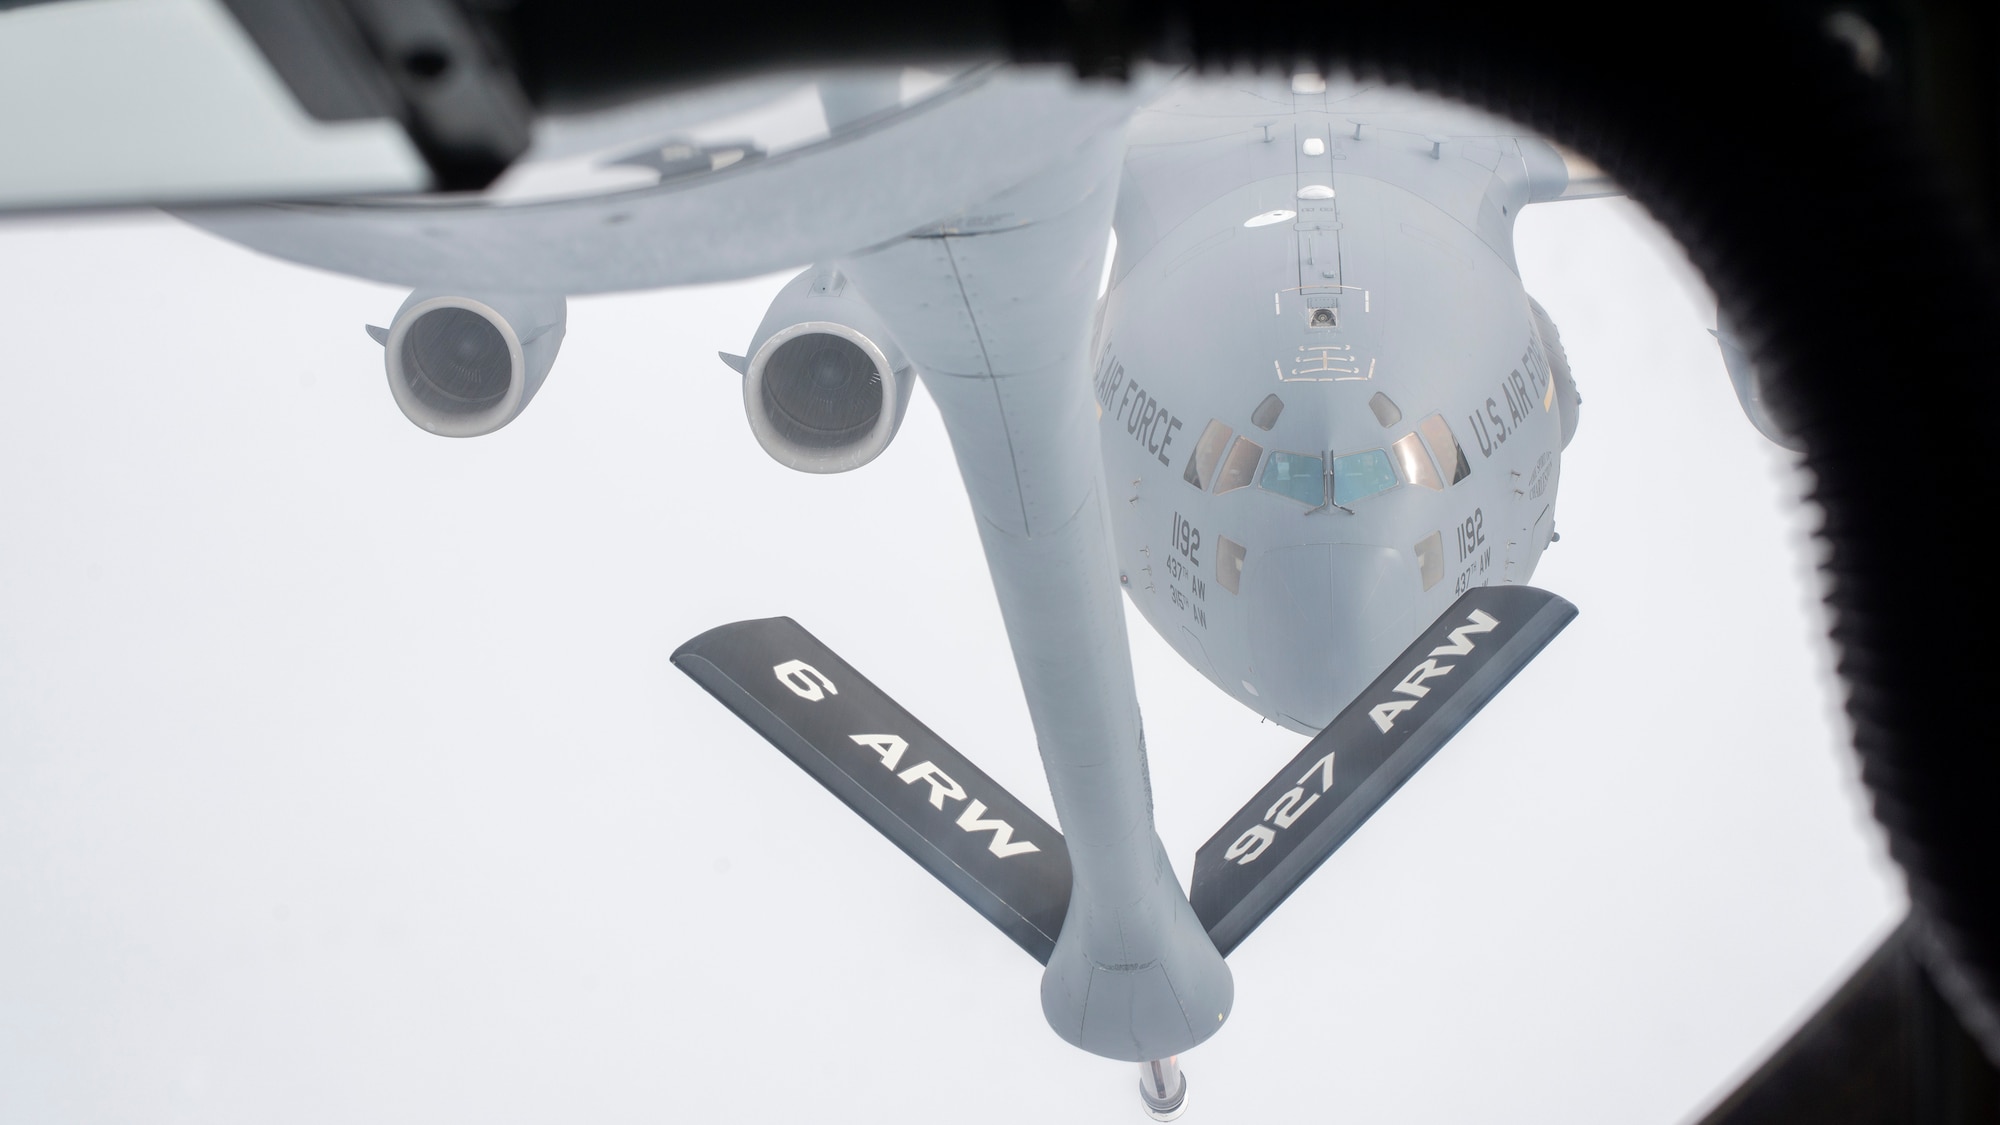 A C-17 Globemaster III aircraft from Joint Base Charleston, S.C., approaches a KC-135 Stratotanker aircraft from MacDill Air Force Base, Fla., Dec. 17, 2019.